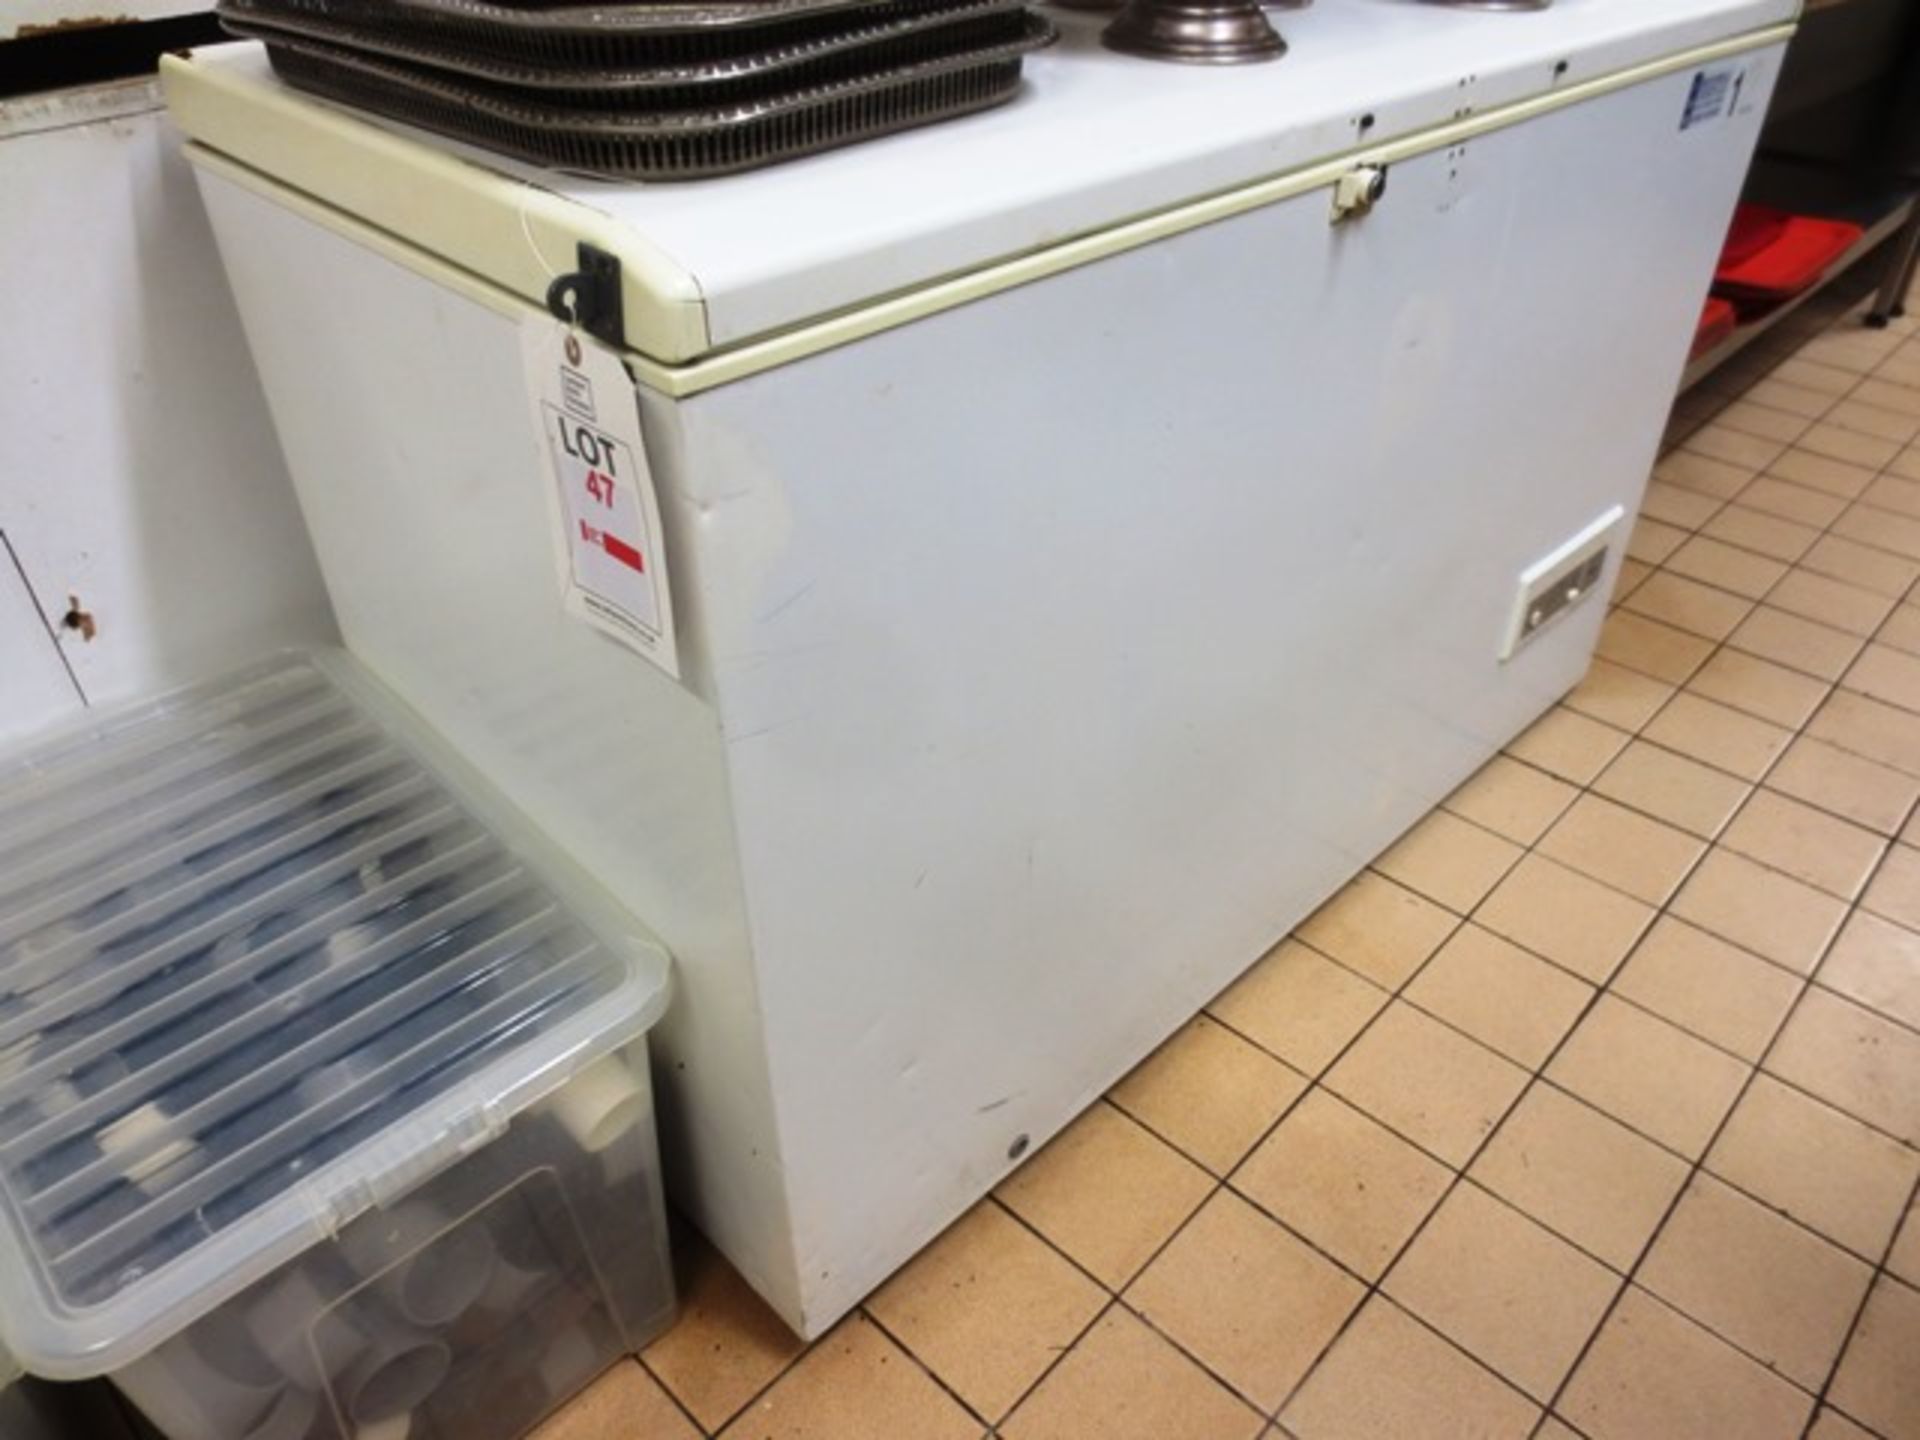 Unbadged chest freezer, approx 1350mm in length